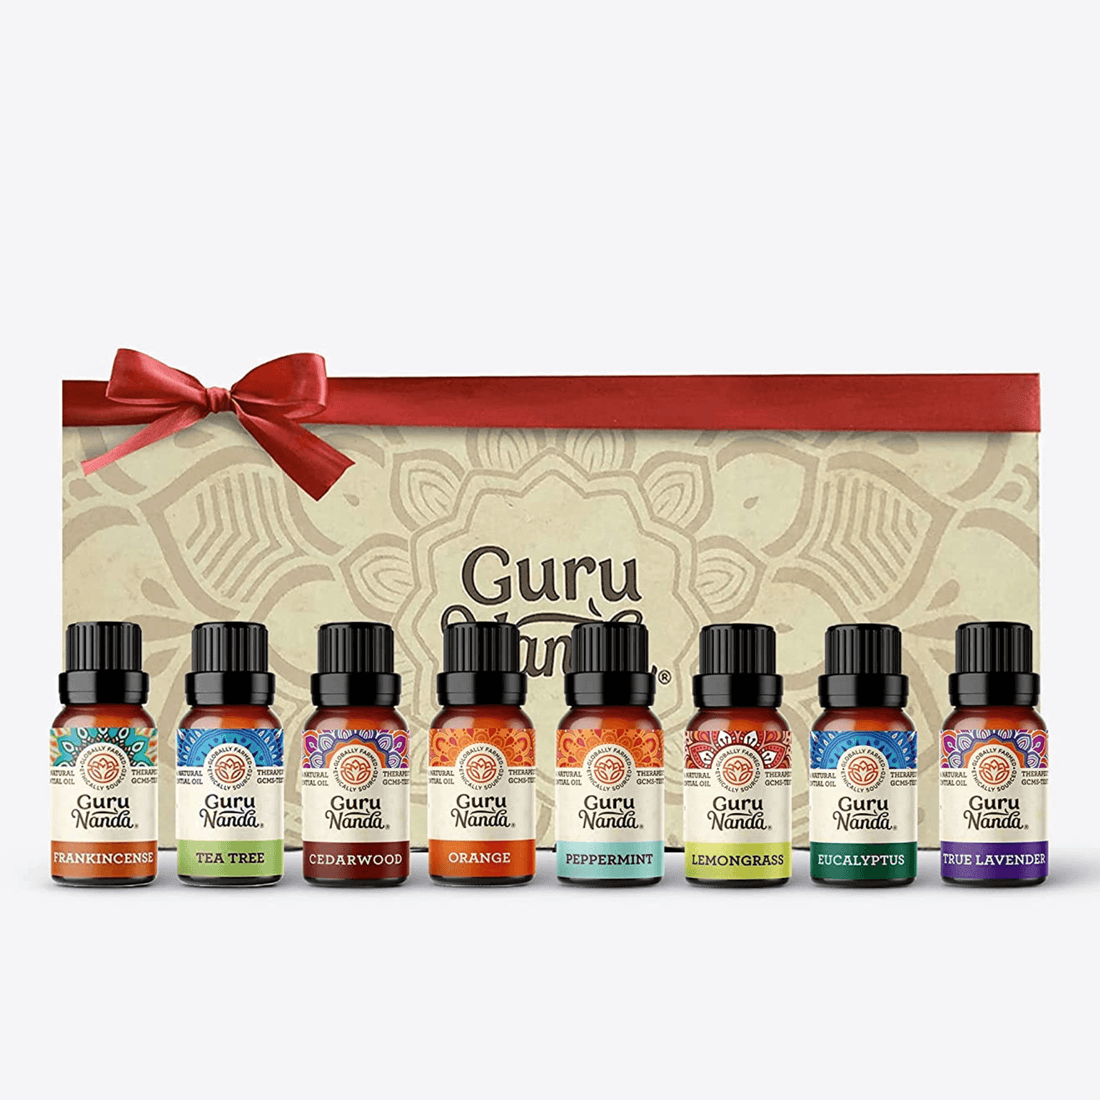 GuruNanda Essential Oil Review with Yoga Instructor Alicia Ace